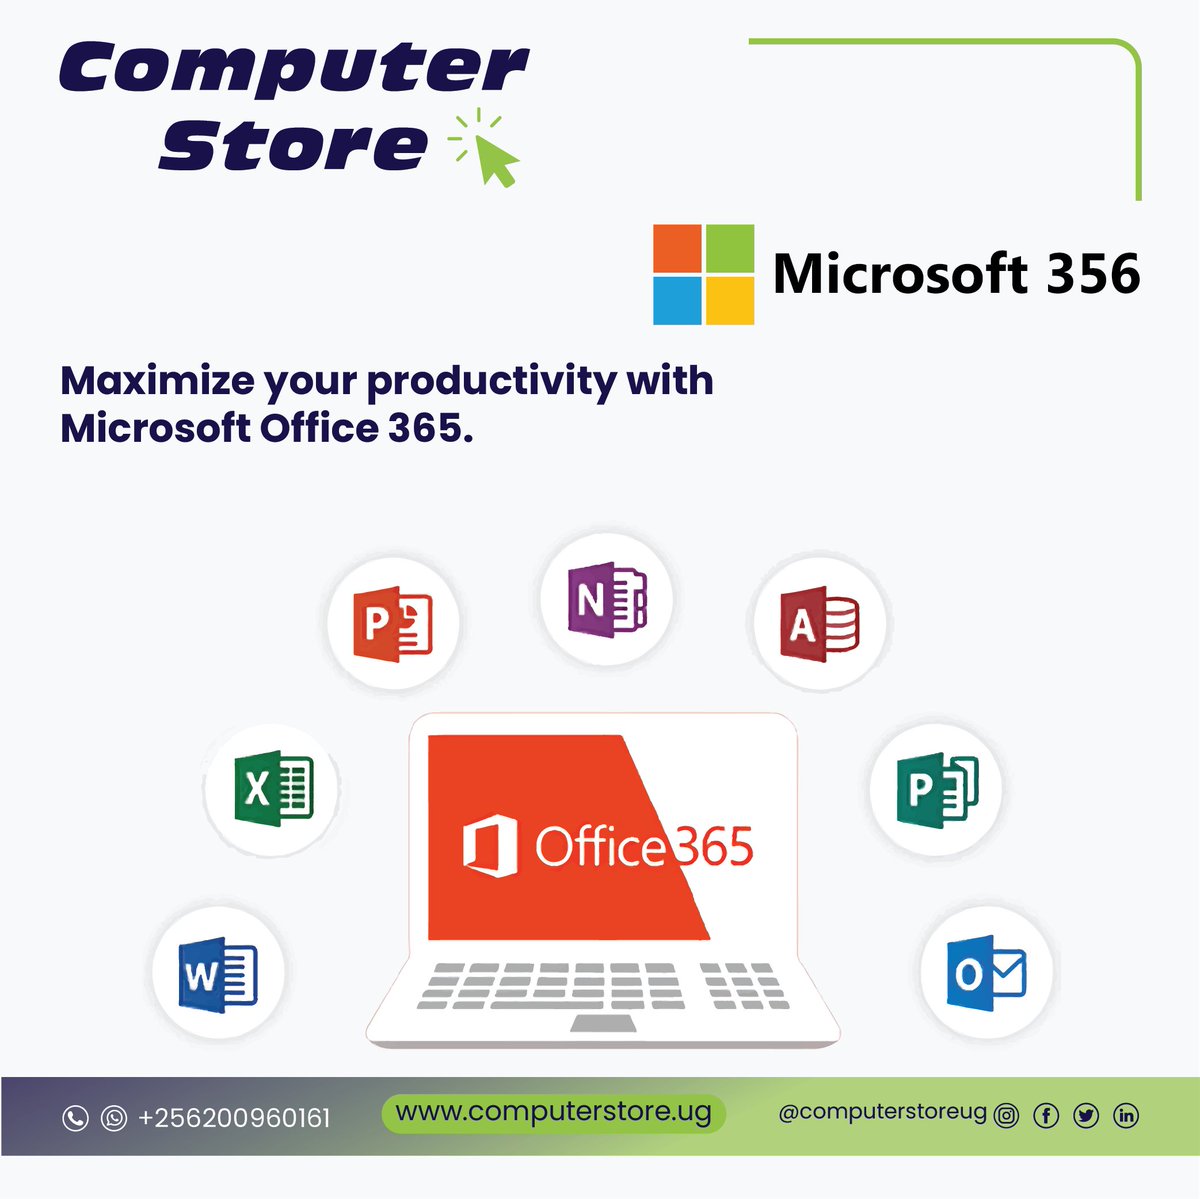 Ready to turn 'busy' into 'productive'? 🔄📊 Microsoft Office 365 is the transformation you need to make it happen. 💼🚀

Get in touch today to learn more.

Call +256200960161 or email us at info@computerstore.ug
#NextGenerationITSolutions #Microsoft #Office365